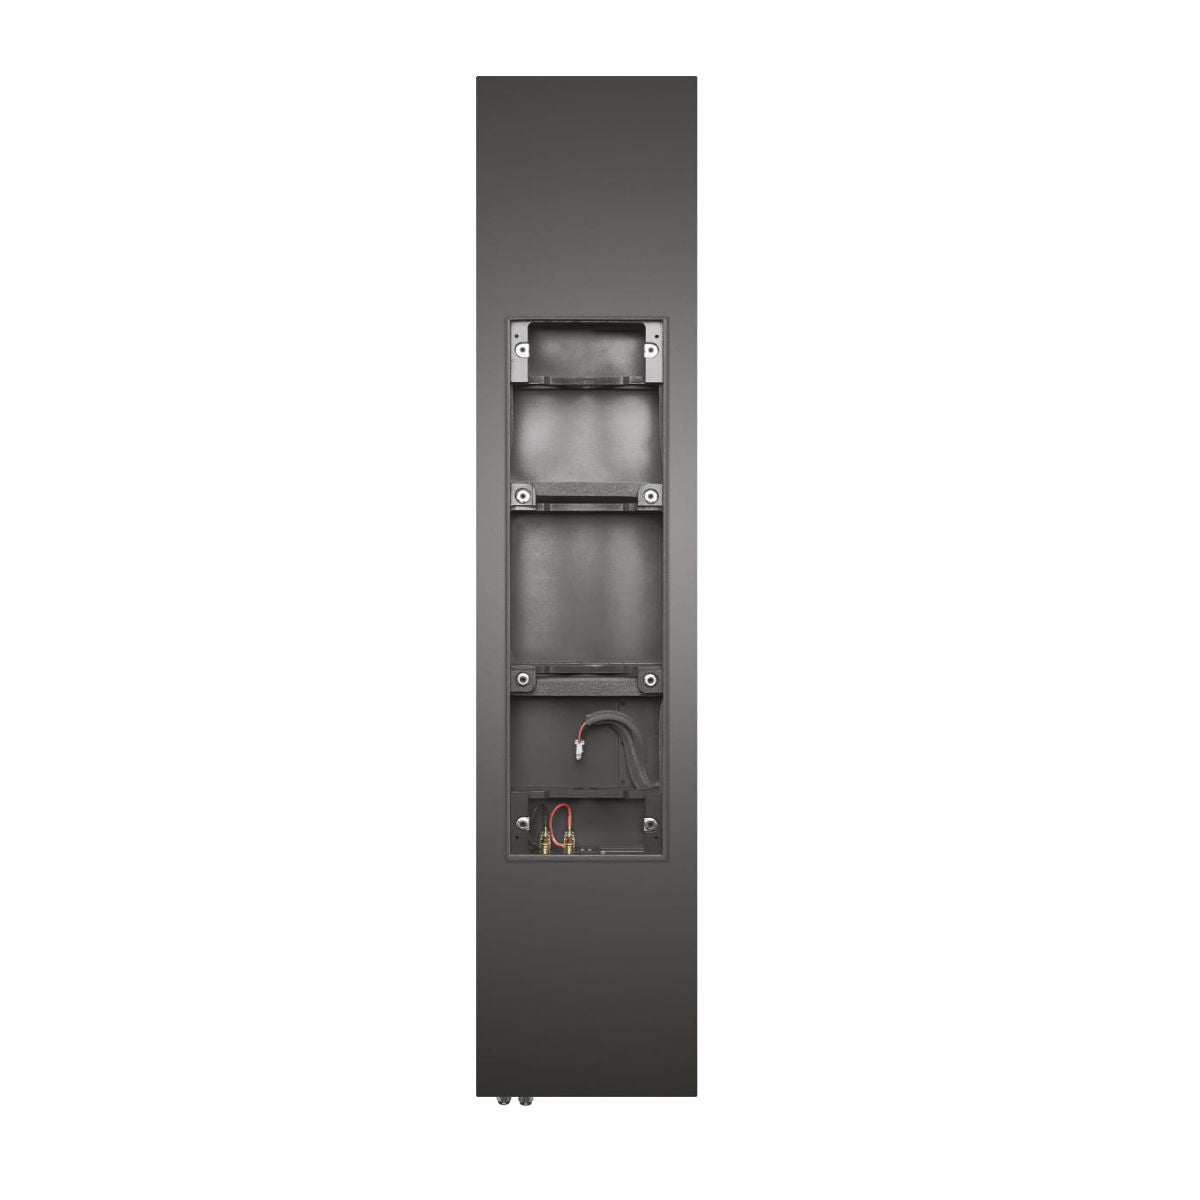 Bowers & Wilkins PMK 8.3 - 8.3D In-Wall / Back Box